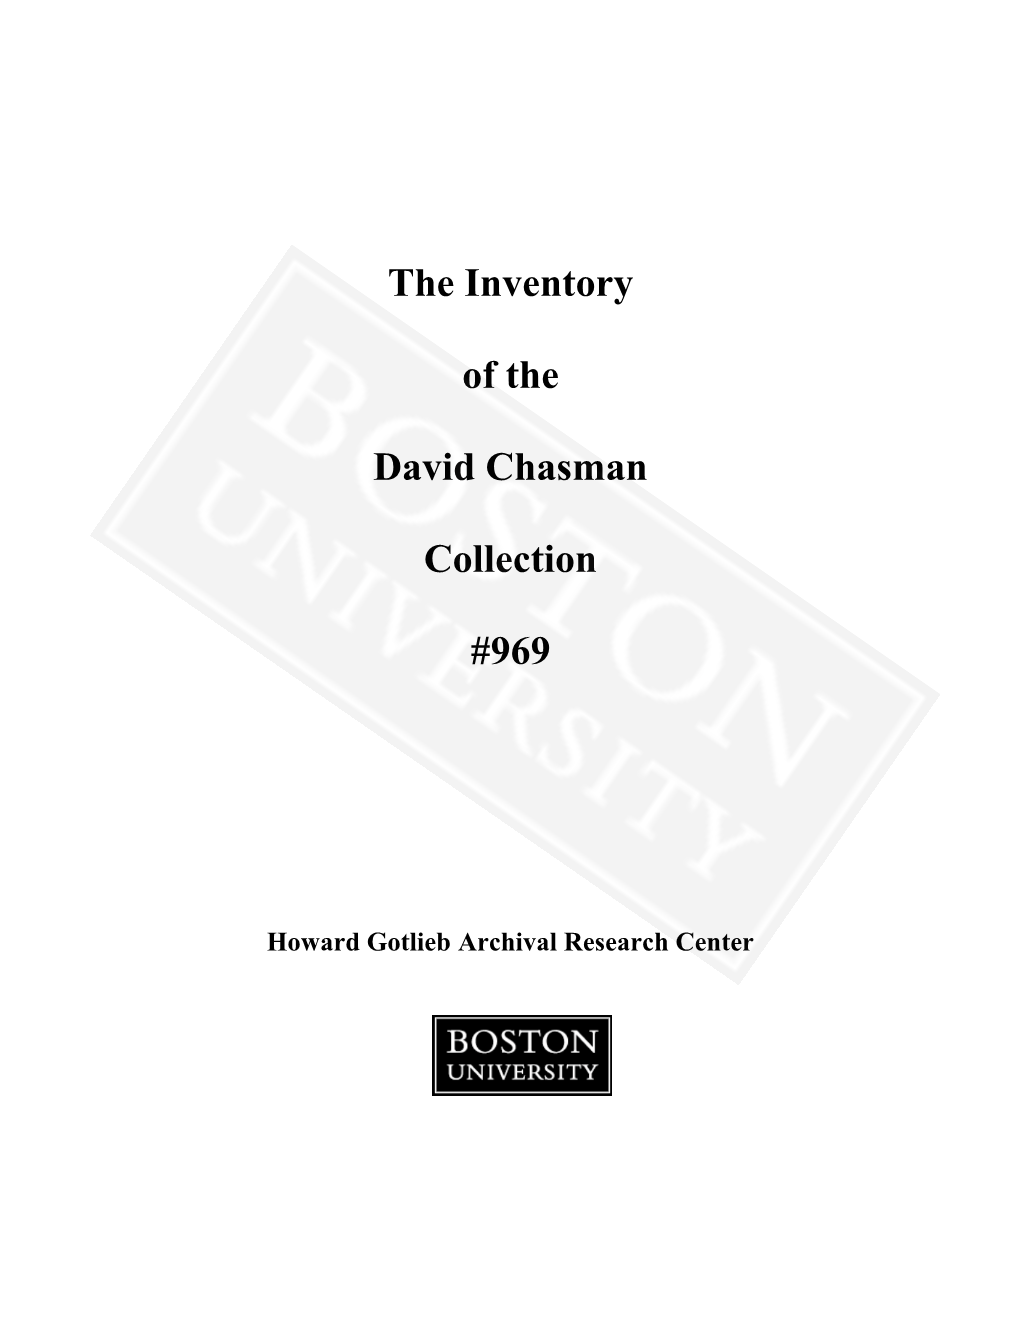 The Inventory of the David Chasman Collection #969